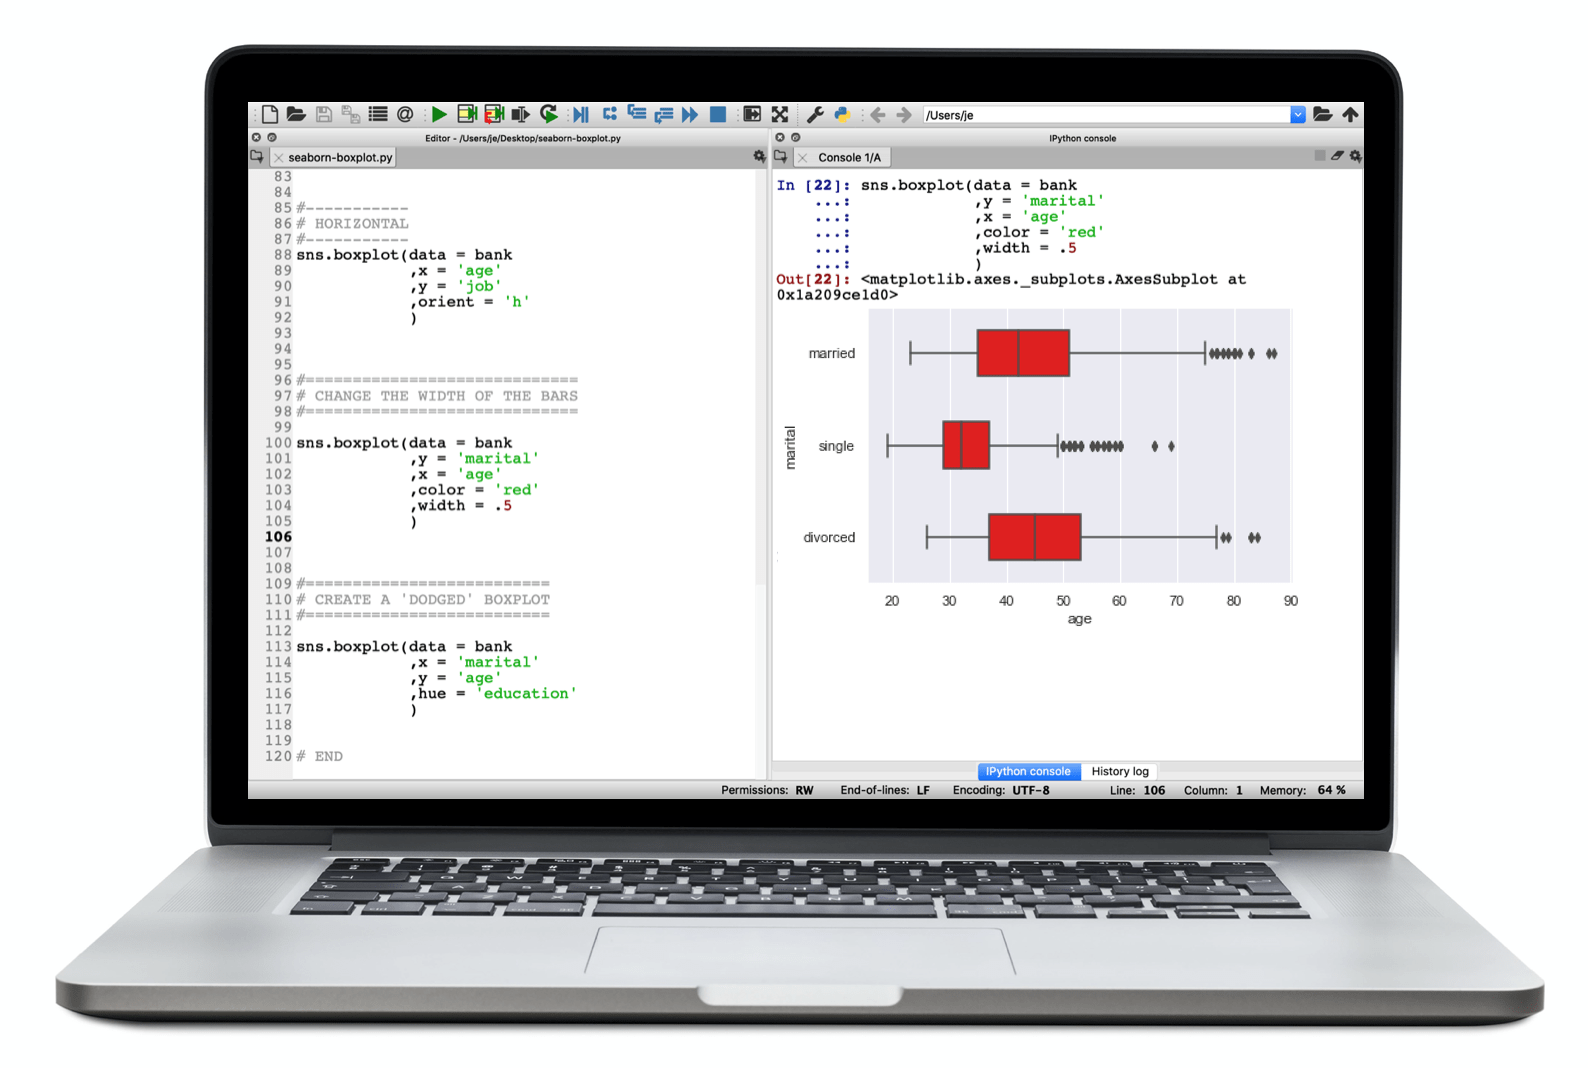 An image of a laptop, showing an IDE with Seaborn code and a corresponding red boxplot.